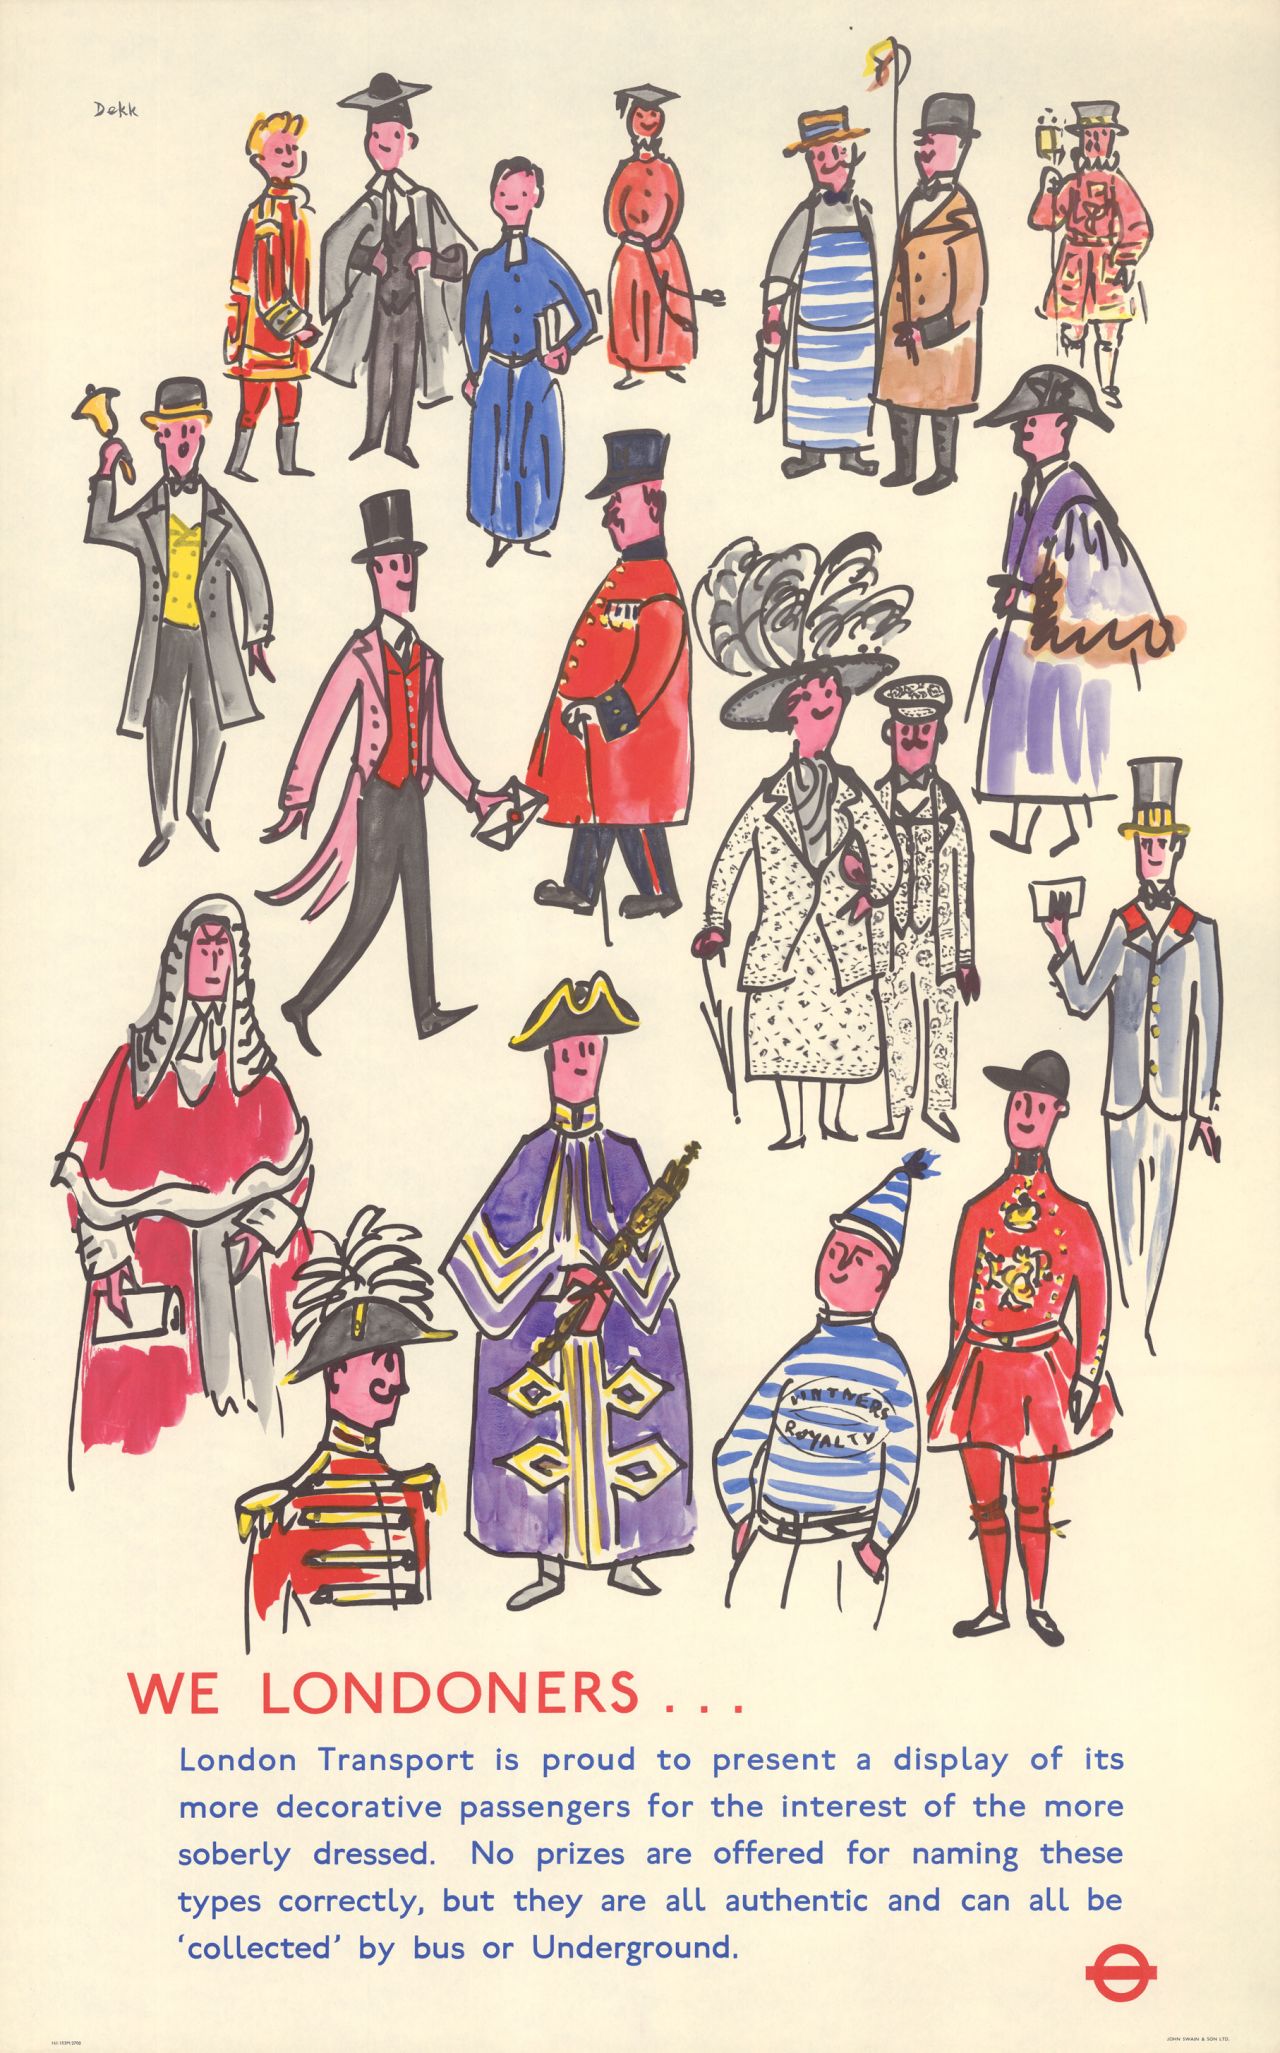 This poster illustrates a wide variety of London characters -- from a fishmonger to the Lord Mayor. Czech born Dorrit Dekk was paid 120 guineas for the design. 